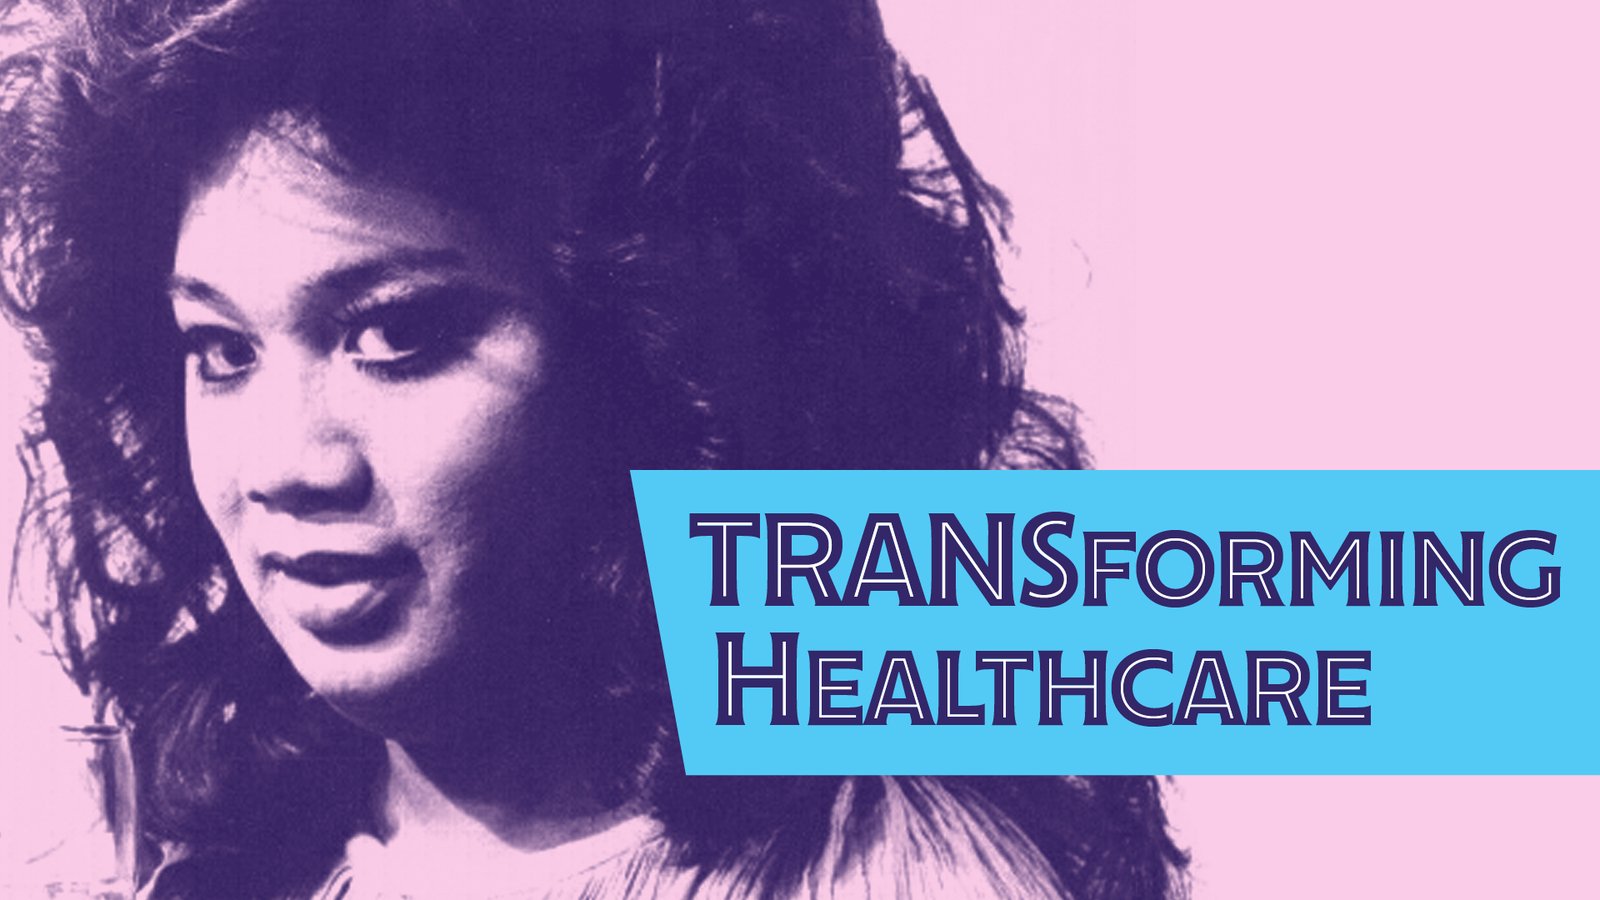 TRANSforming Healthcare - Transgender Cultural Competency for Medical Providers